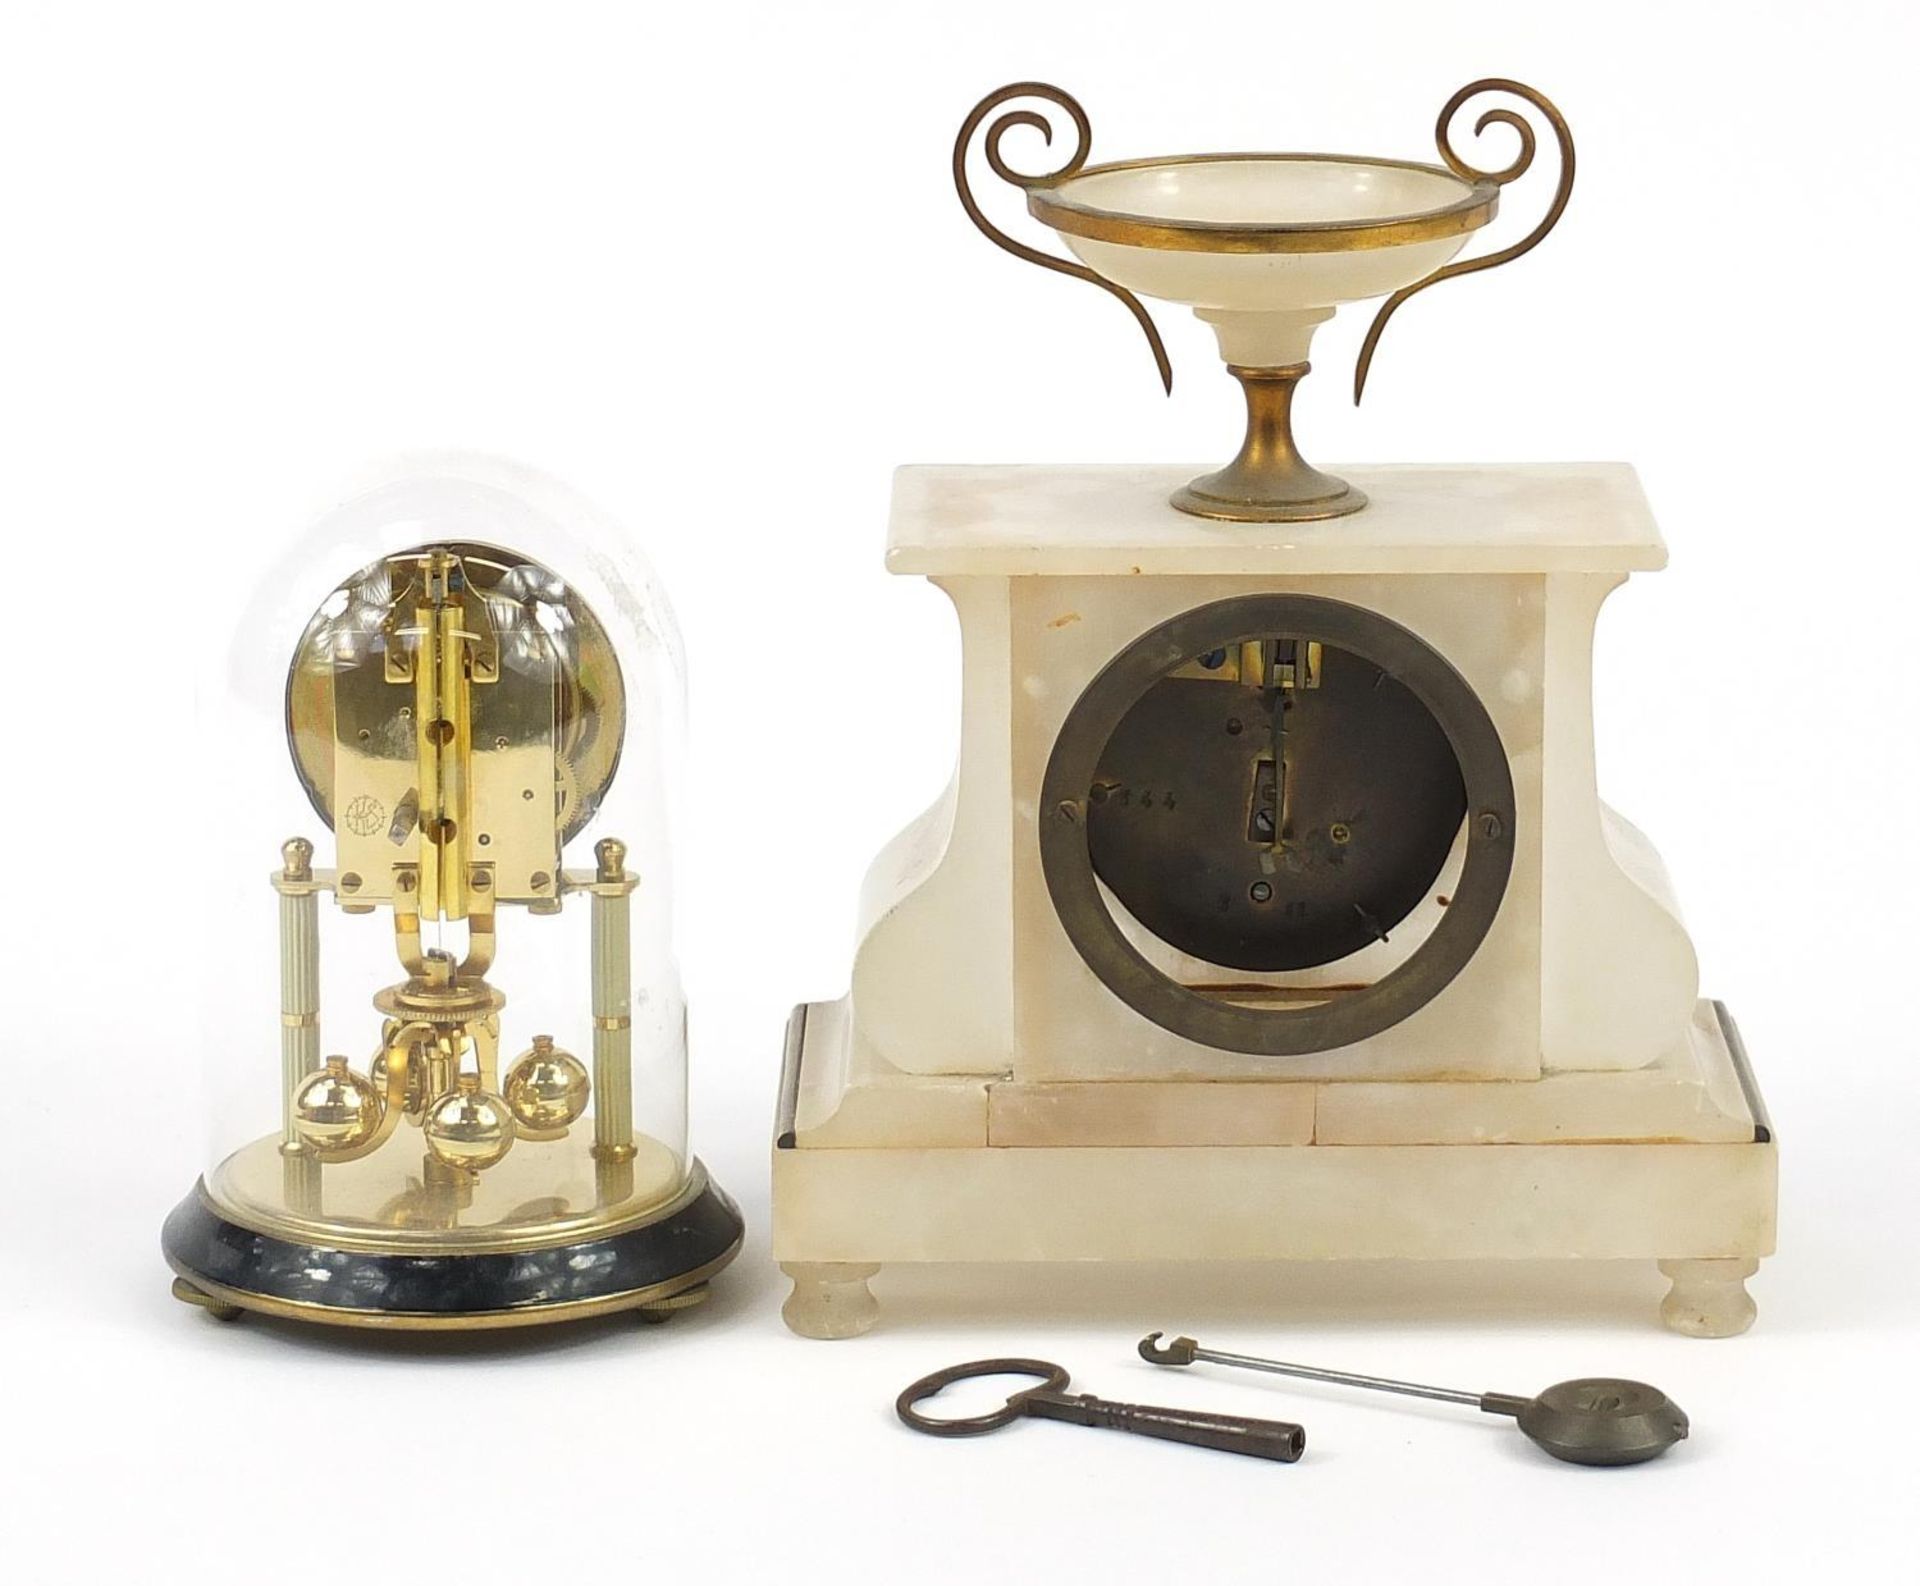 German brass anniversary clock and alabaster mantle clock with enamel dial, the largest 25.5cm high - Image 3 of 6